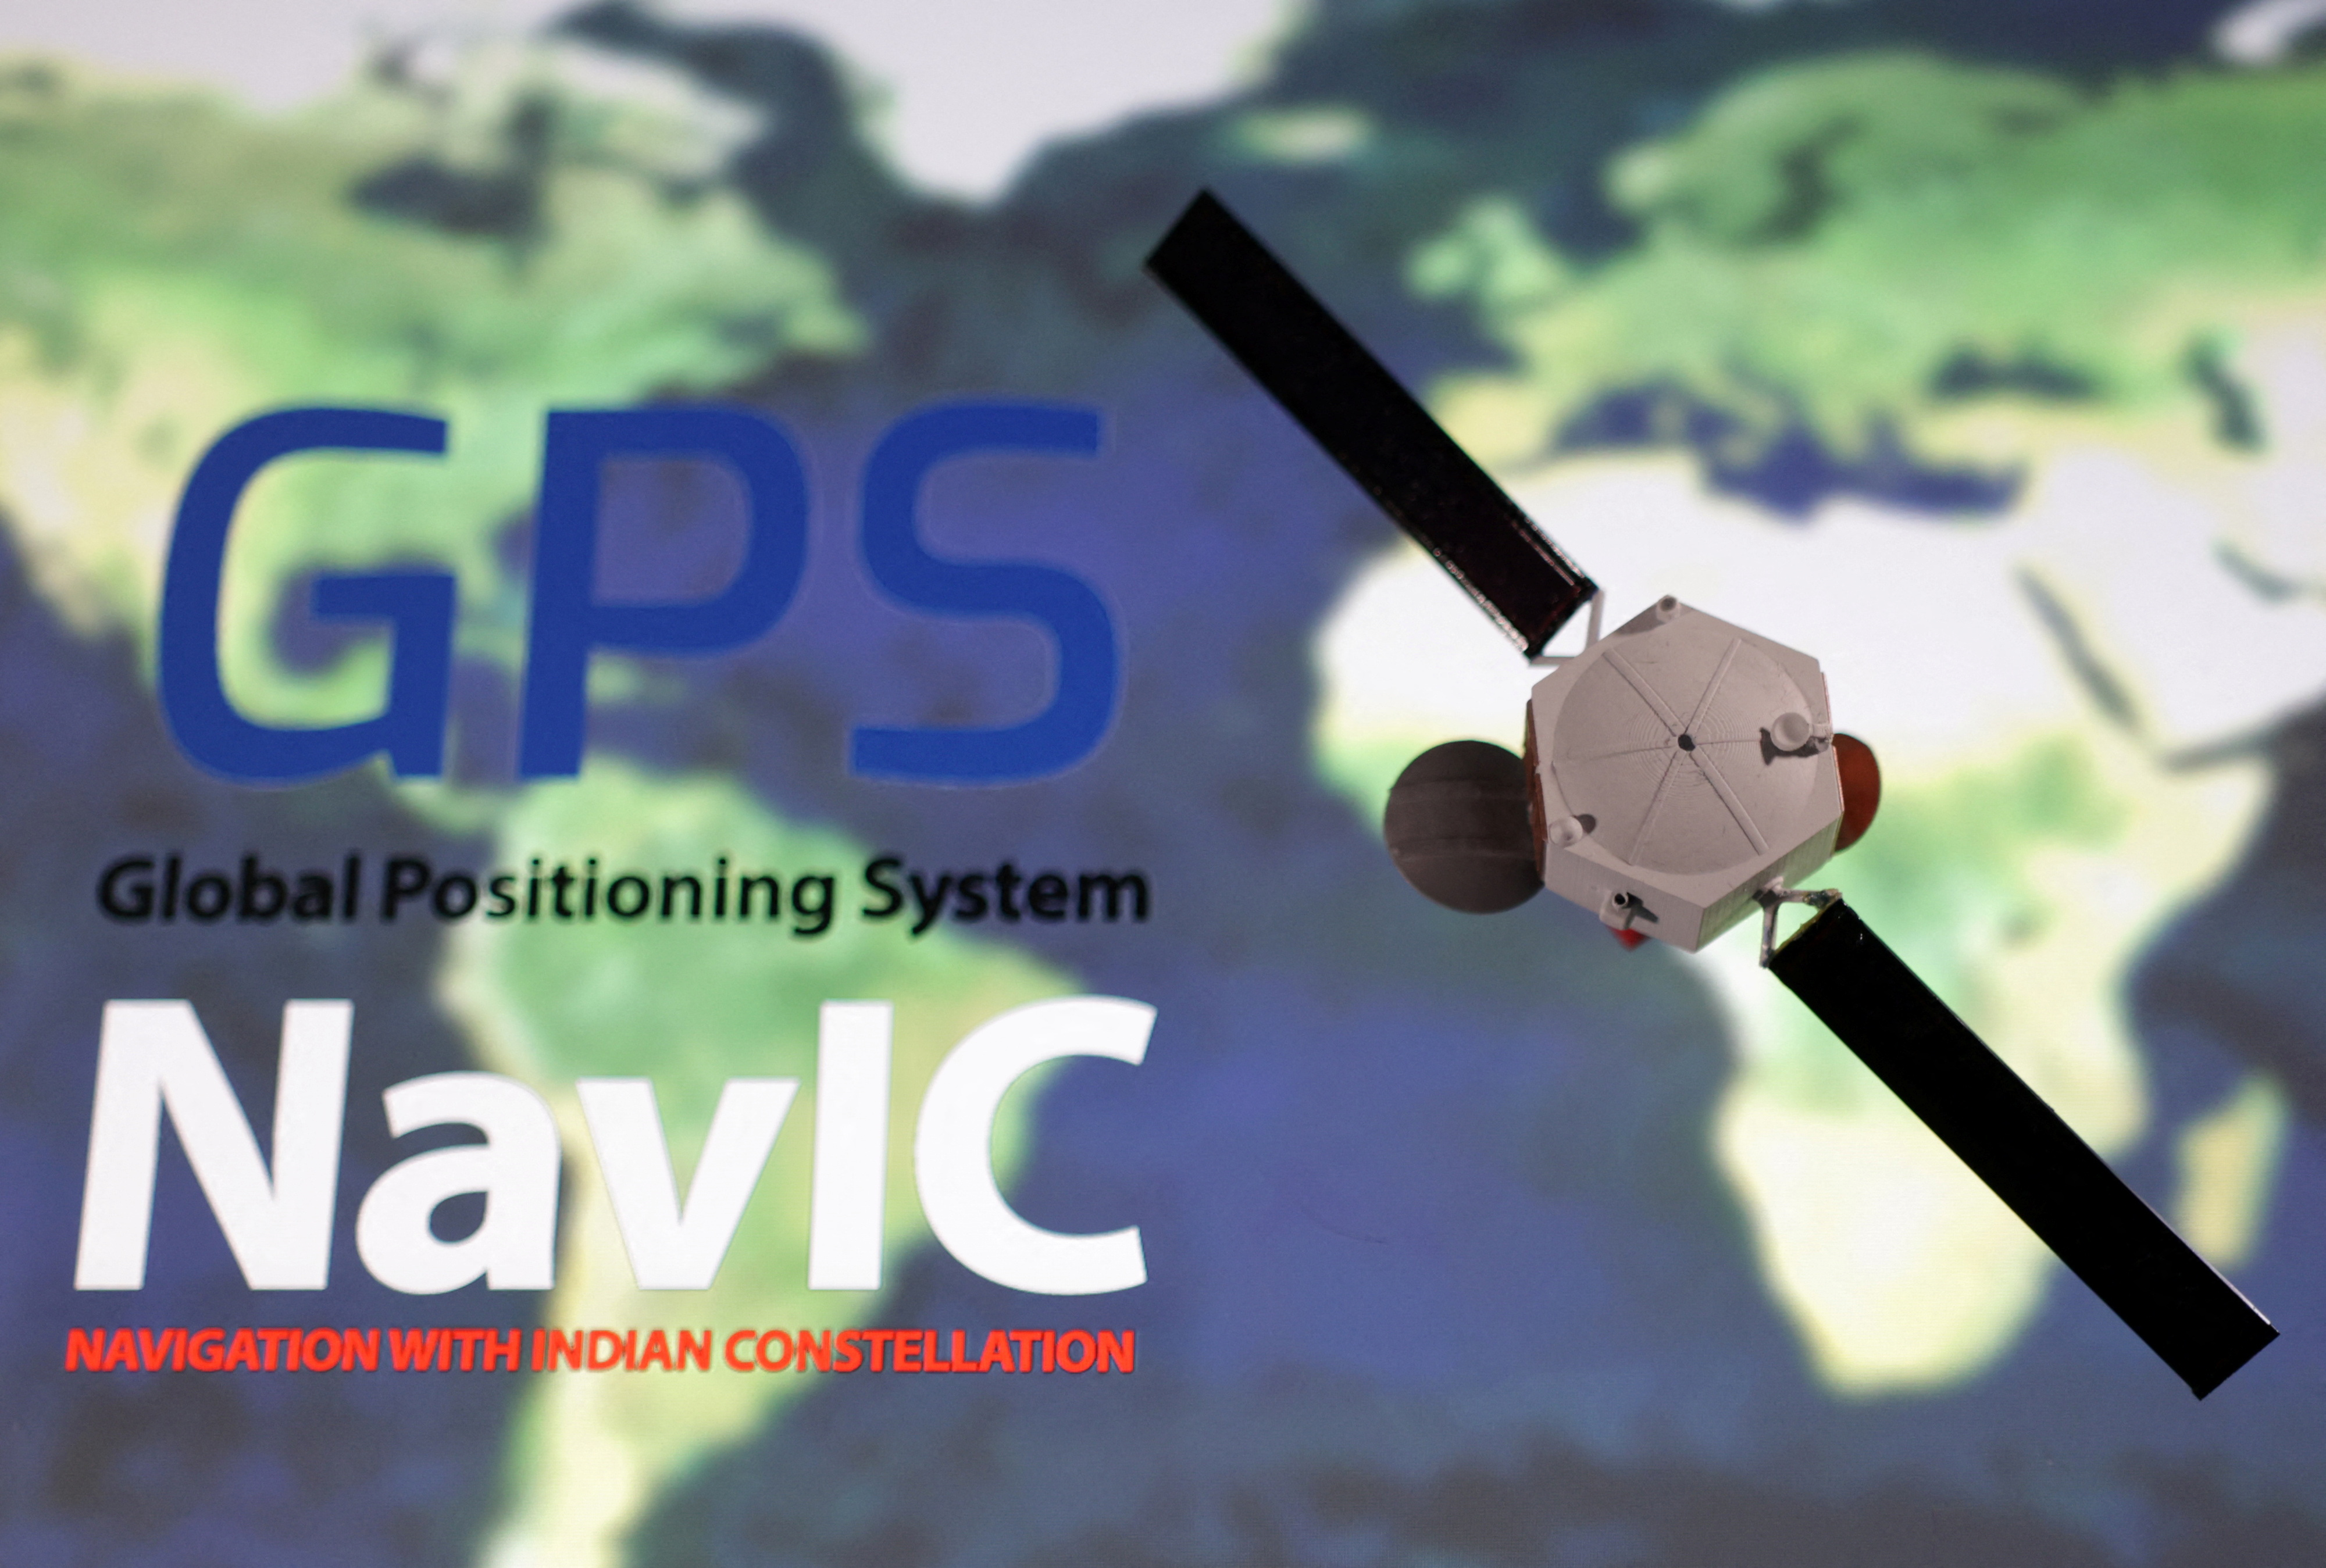 Illustration shows NavIC (Navigation with Indian Constellation) and GPS (Global Positioning System) logos